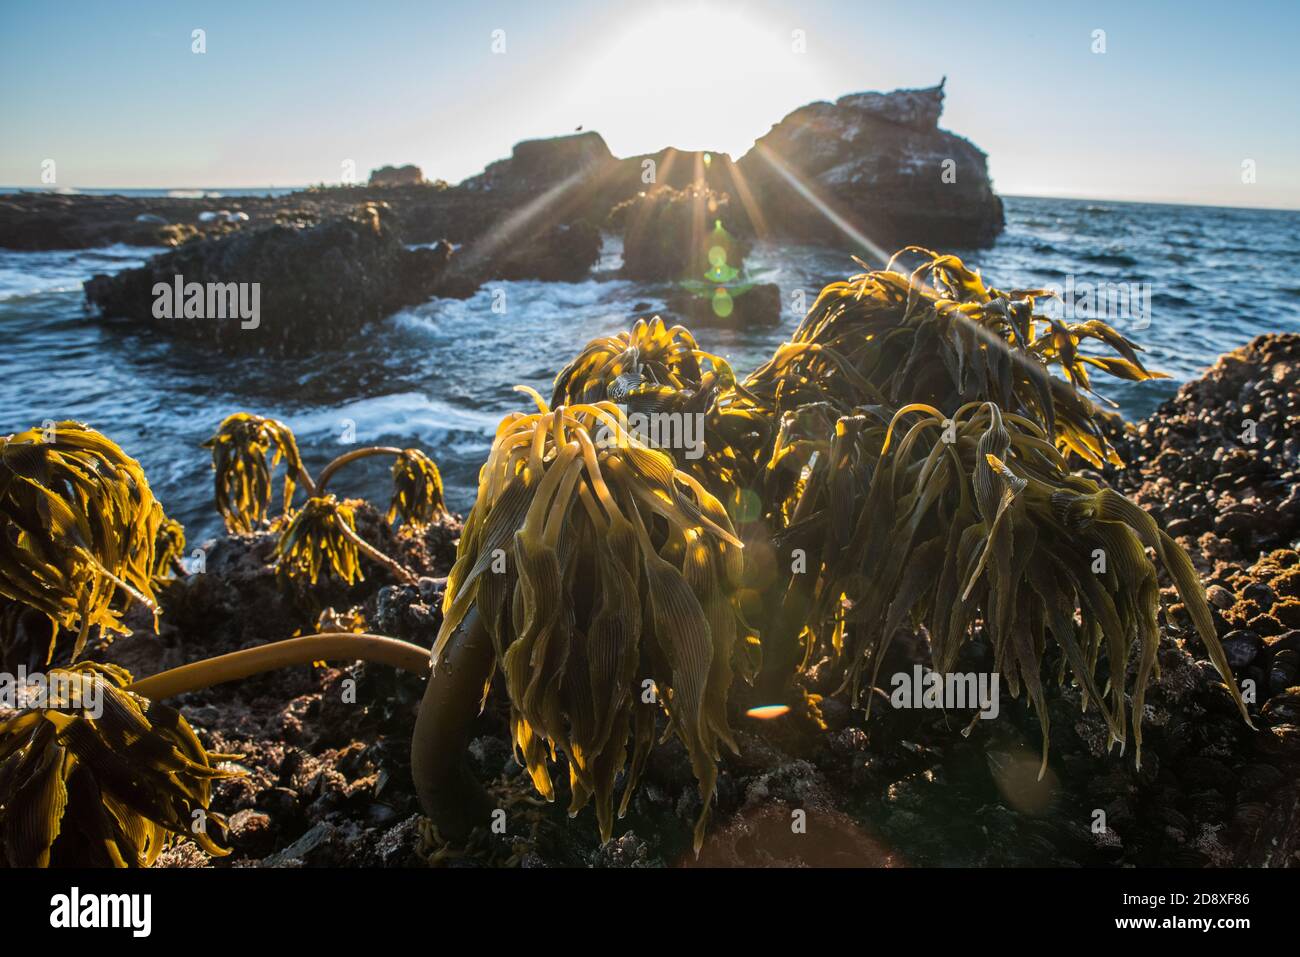 Postelsia palmaeformis, known as sea palm is a type of kelp that can be found growing in the intertidal zone of the rocky shoreline in California. Stock Photo